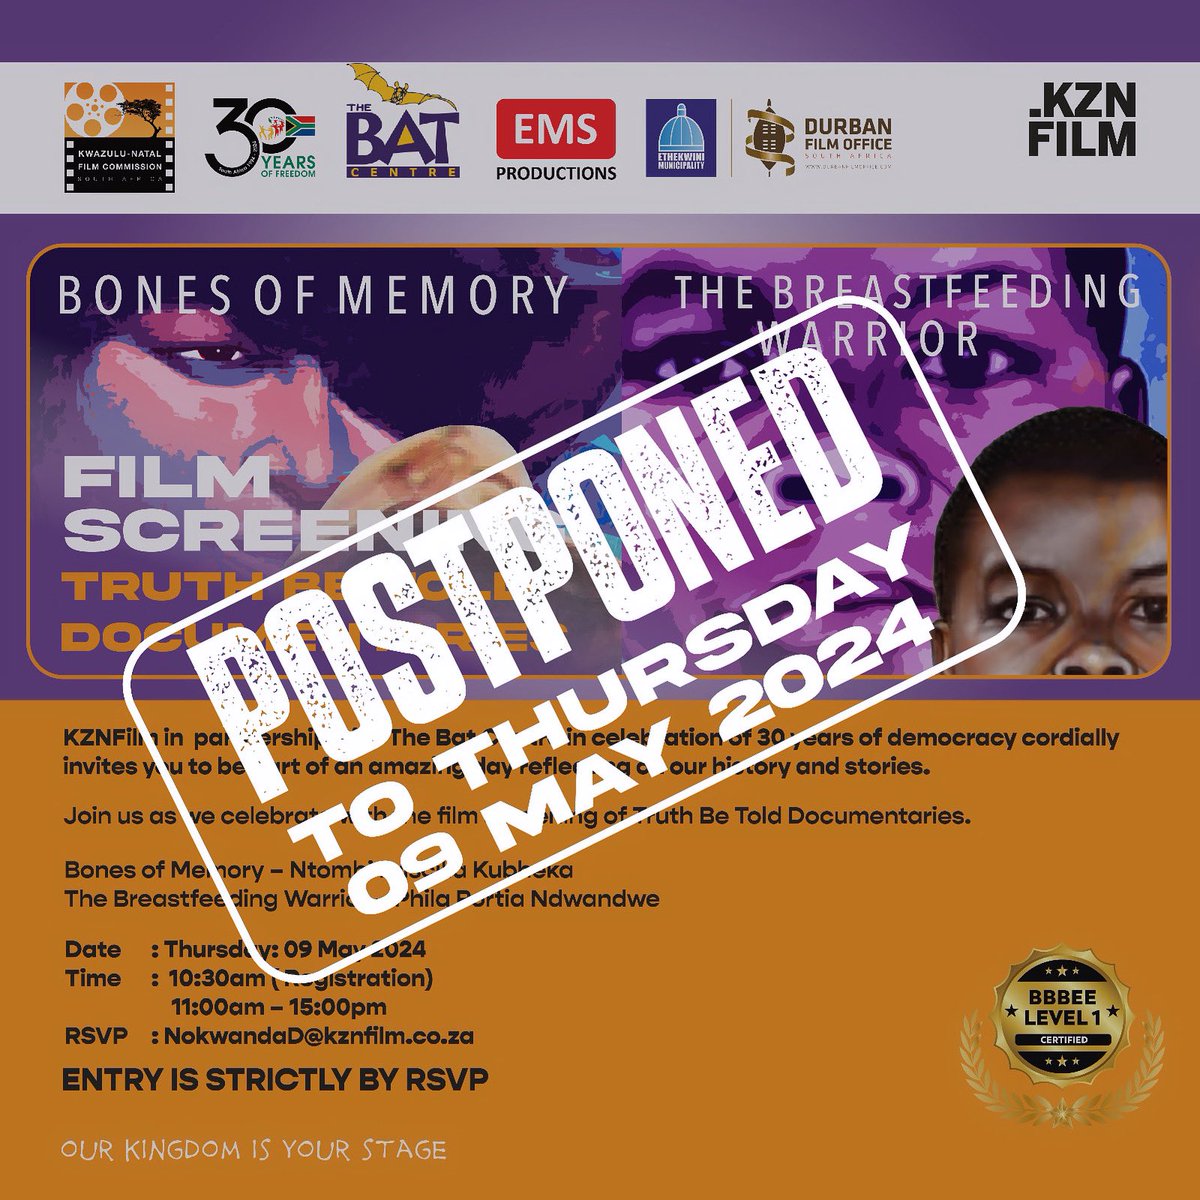 KZNFilm wishes to extend its sincere apologies for any inconvenience caused.  The RSVP’s received will be kept open to give access in the new date for your convenience, unless it is advised differently. Thursday, 9 May 2024 Time     :  10:30 Where :    The BAT Centre